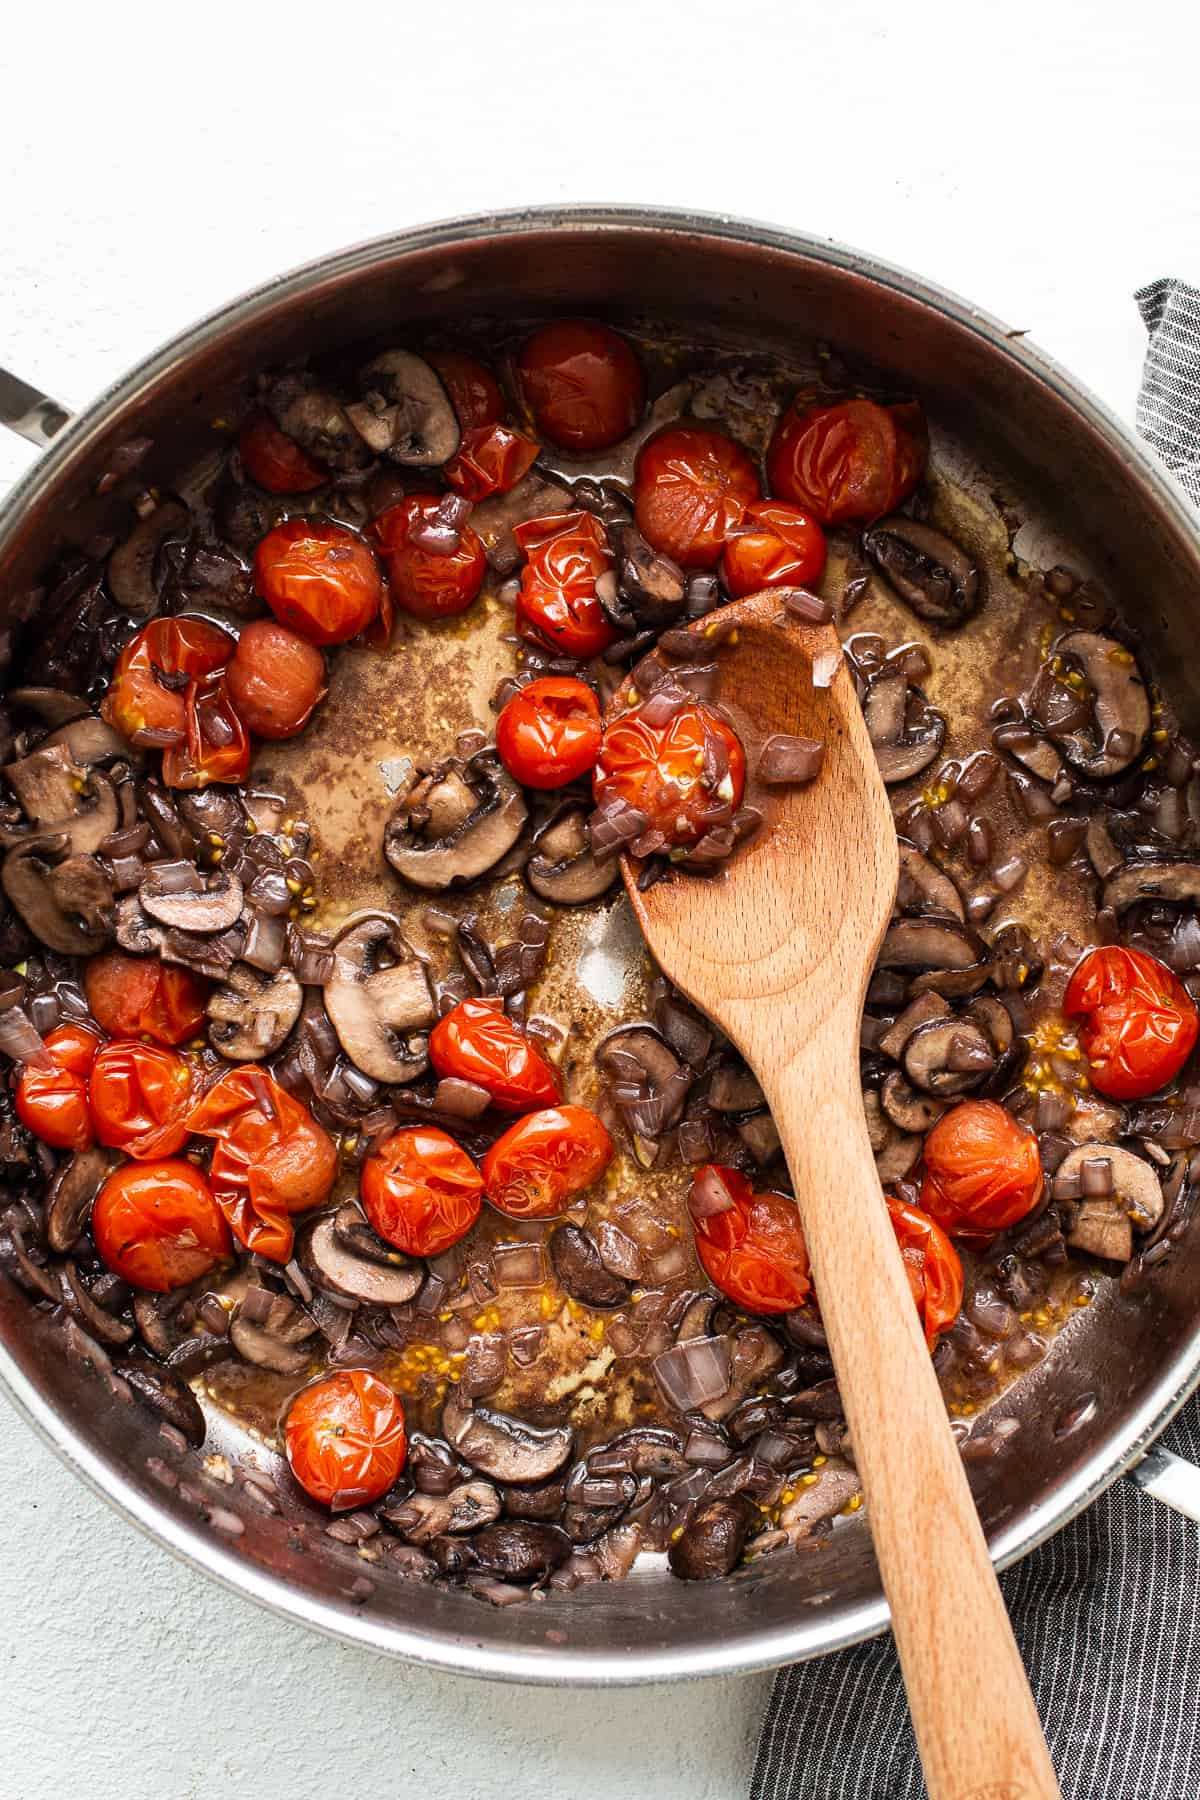 Mushrooms and tomatoes sautéing in a skillet.